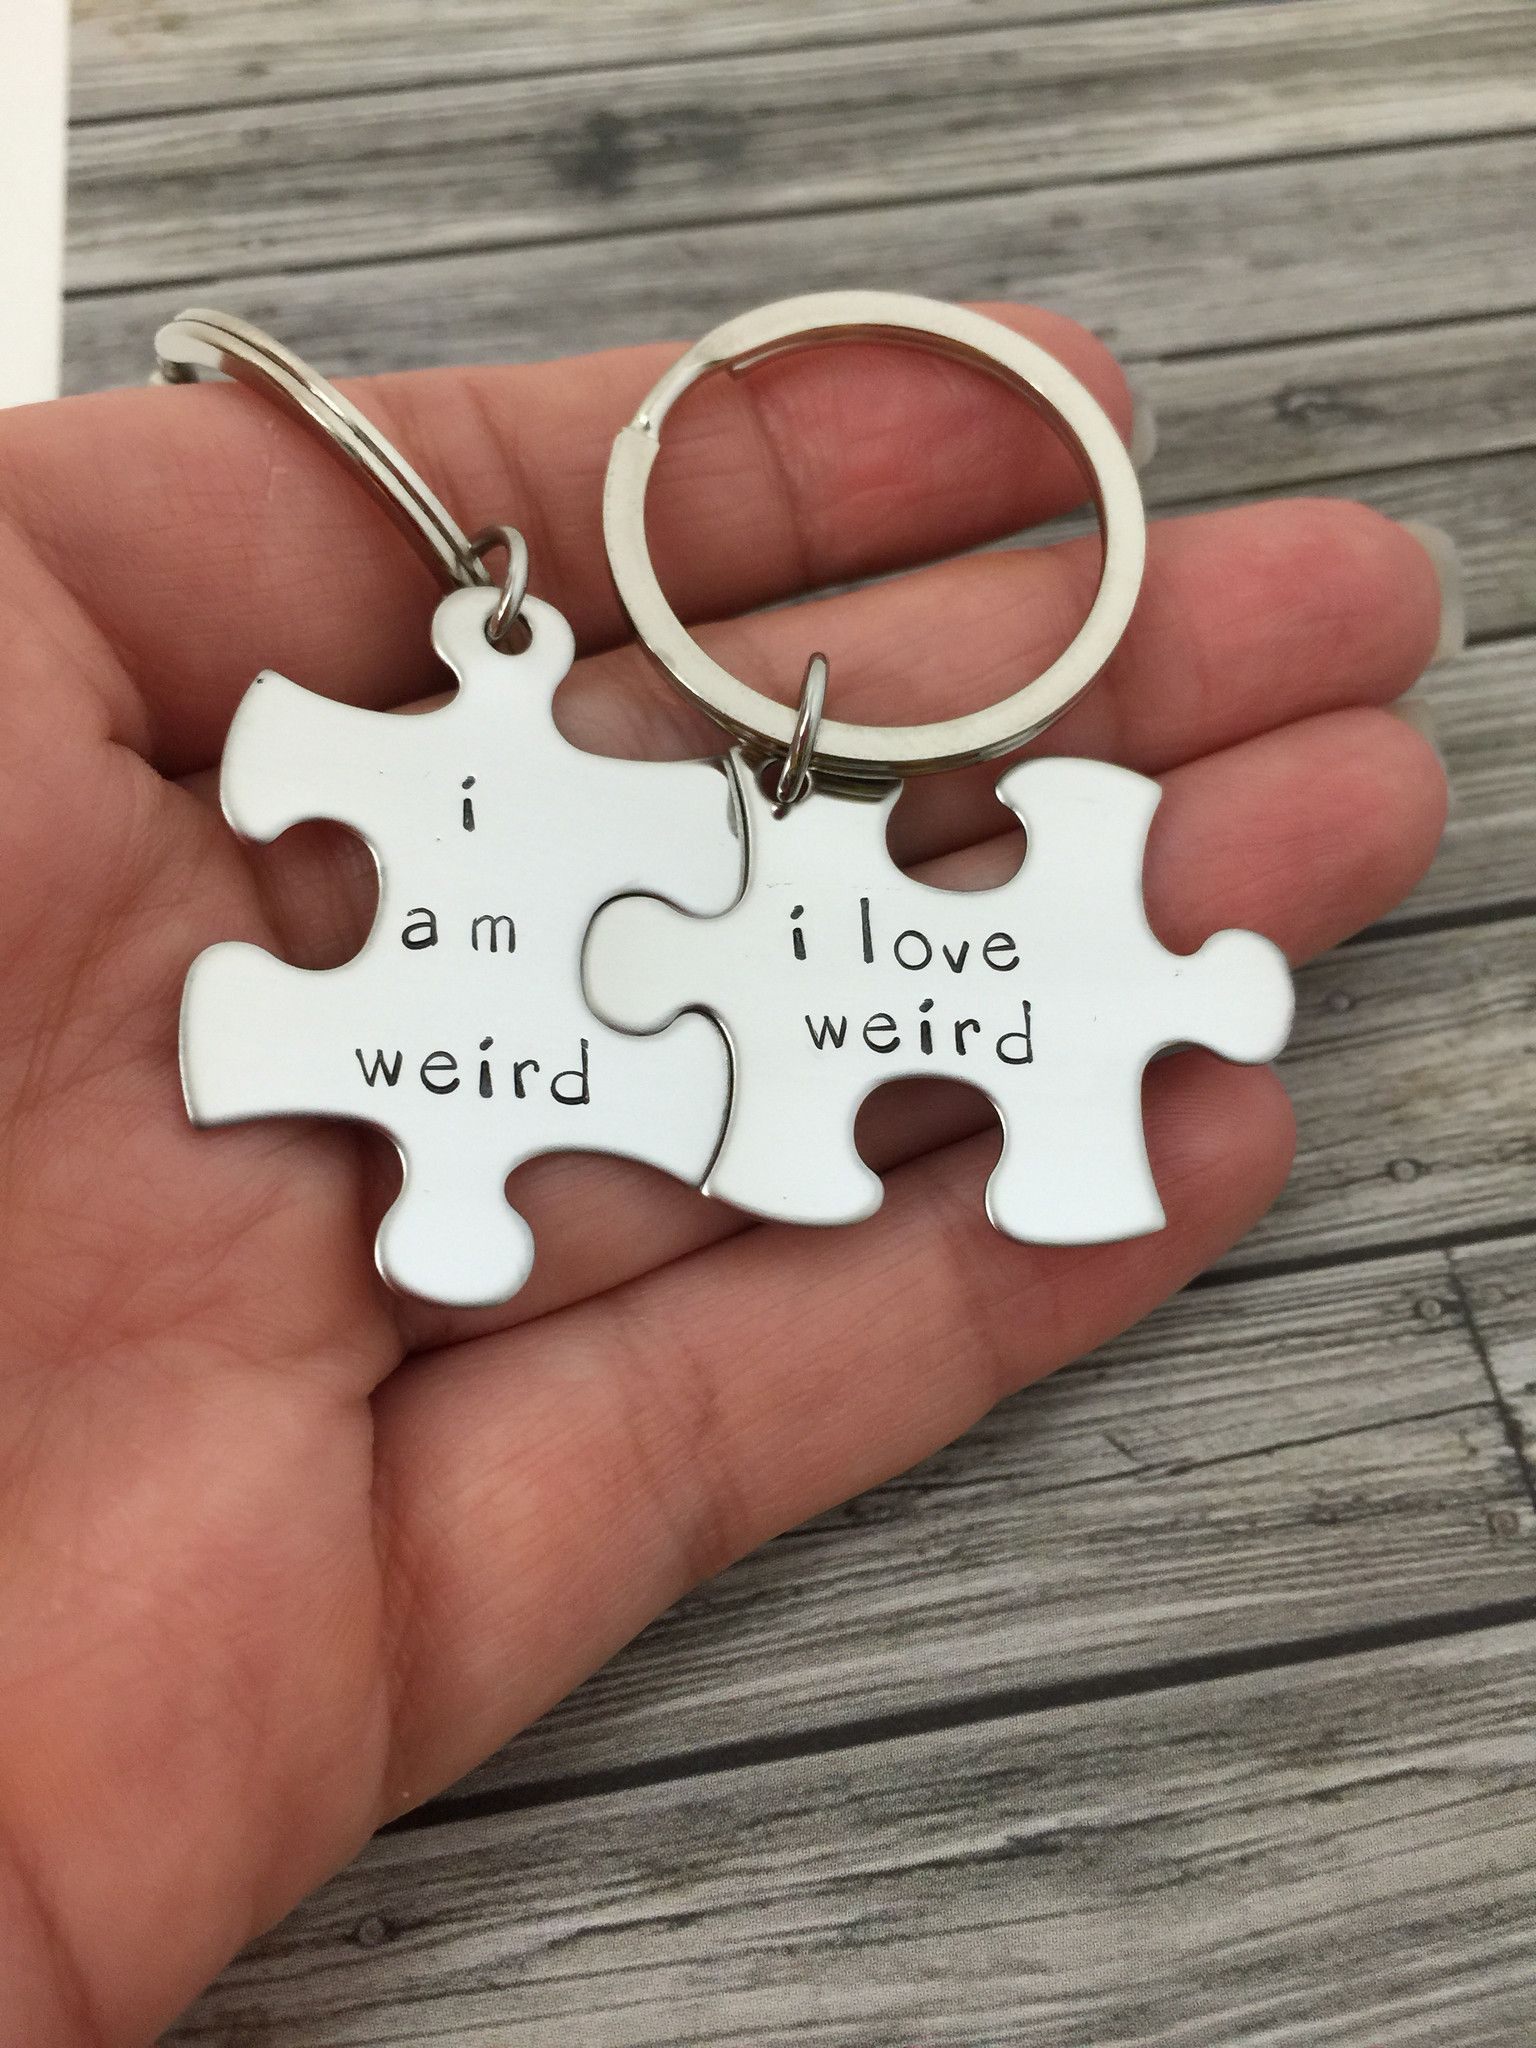 Funny Couples Gift Ideas
 I am weird I love weird Couples Keychains Couples Gift